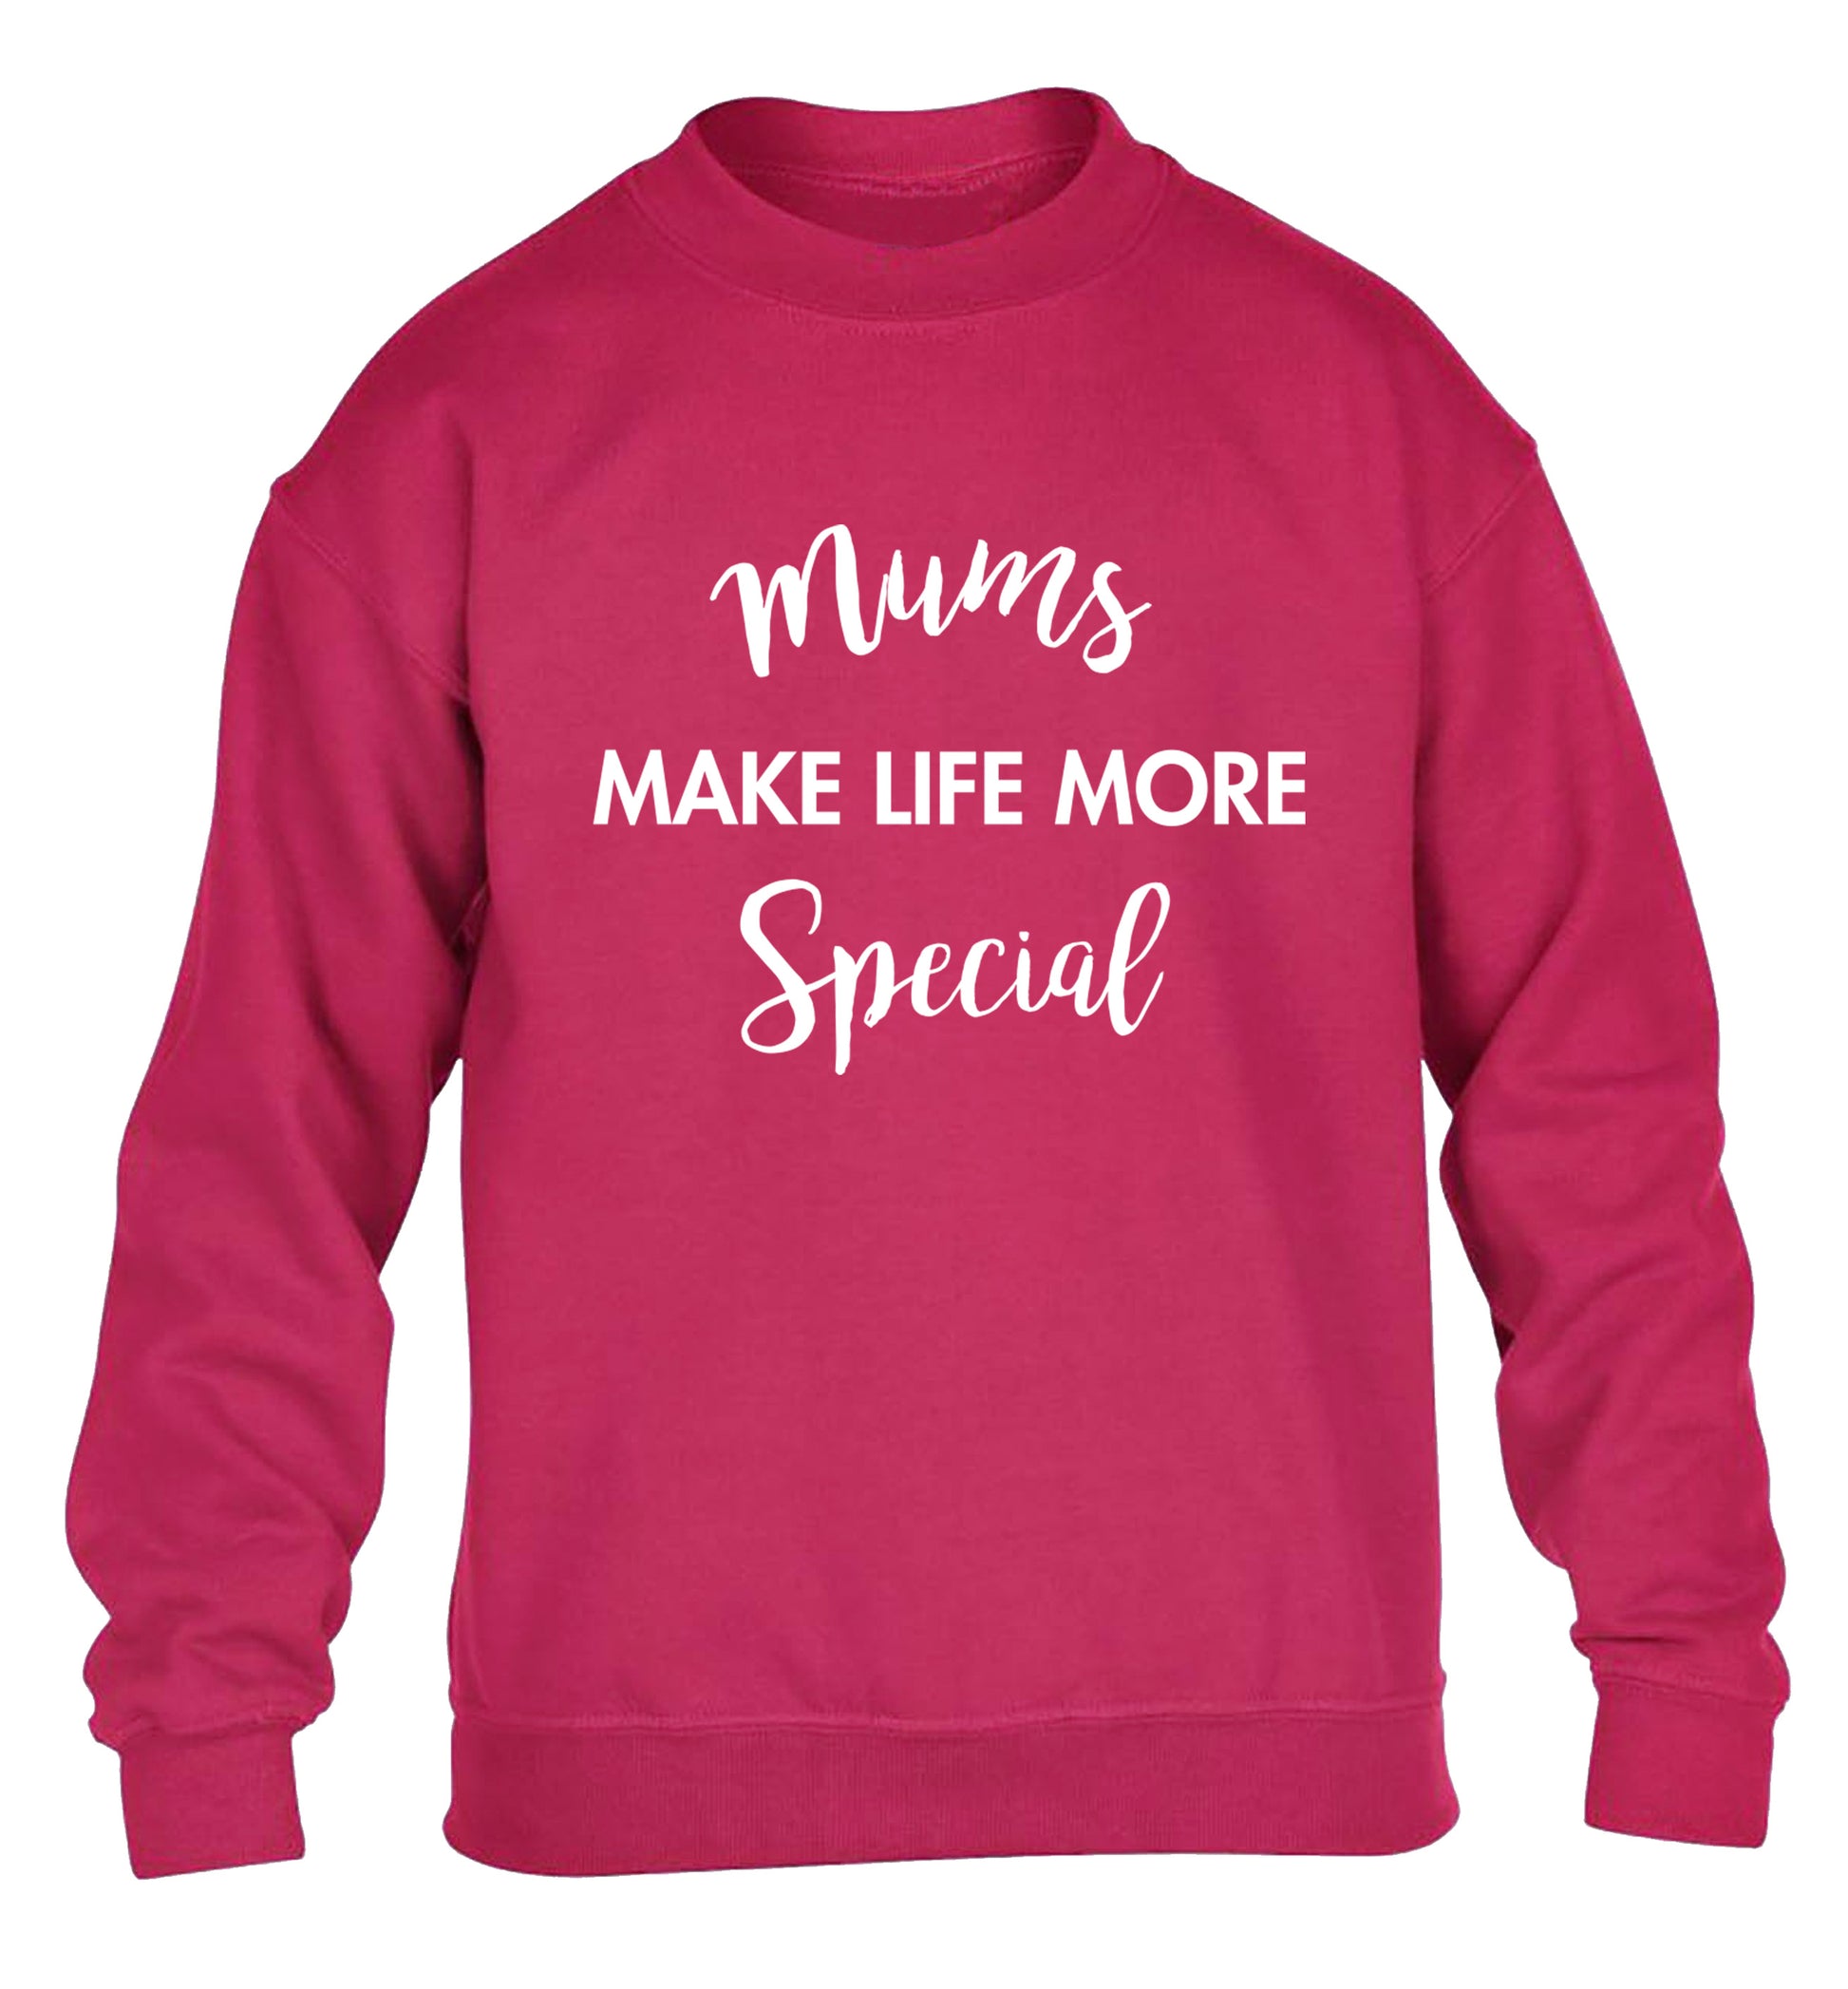 Mum's make life more special children's pink sweater 12-13 Years